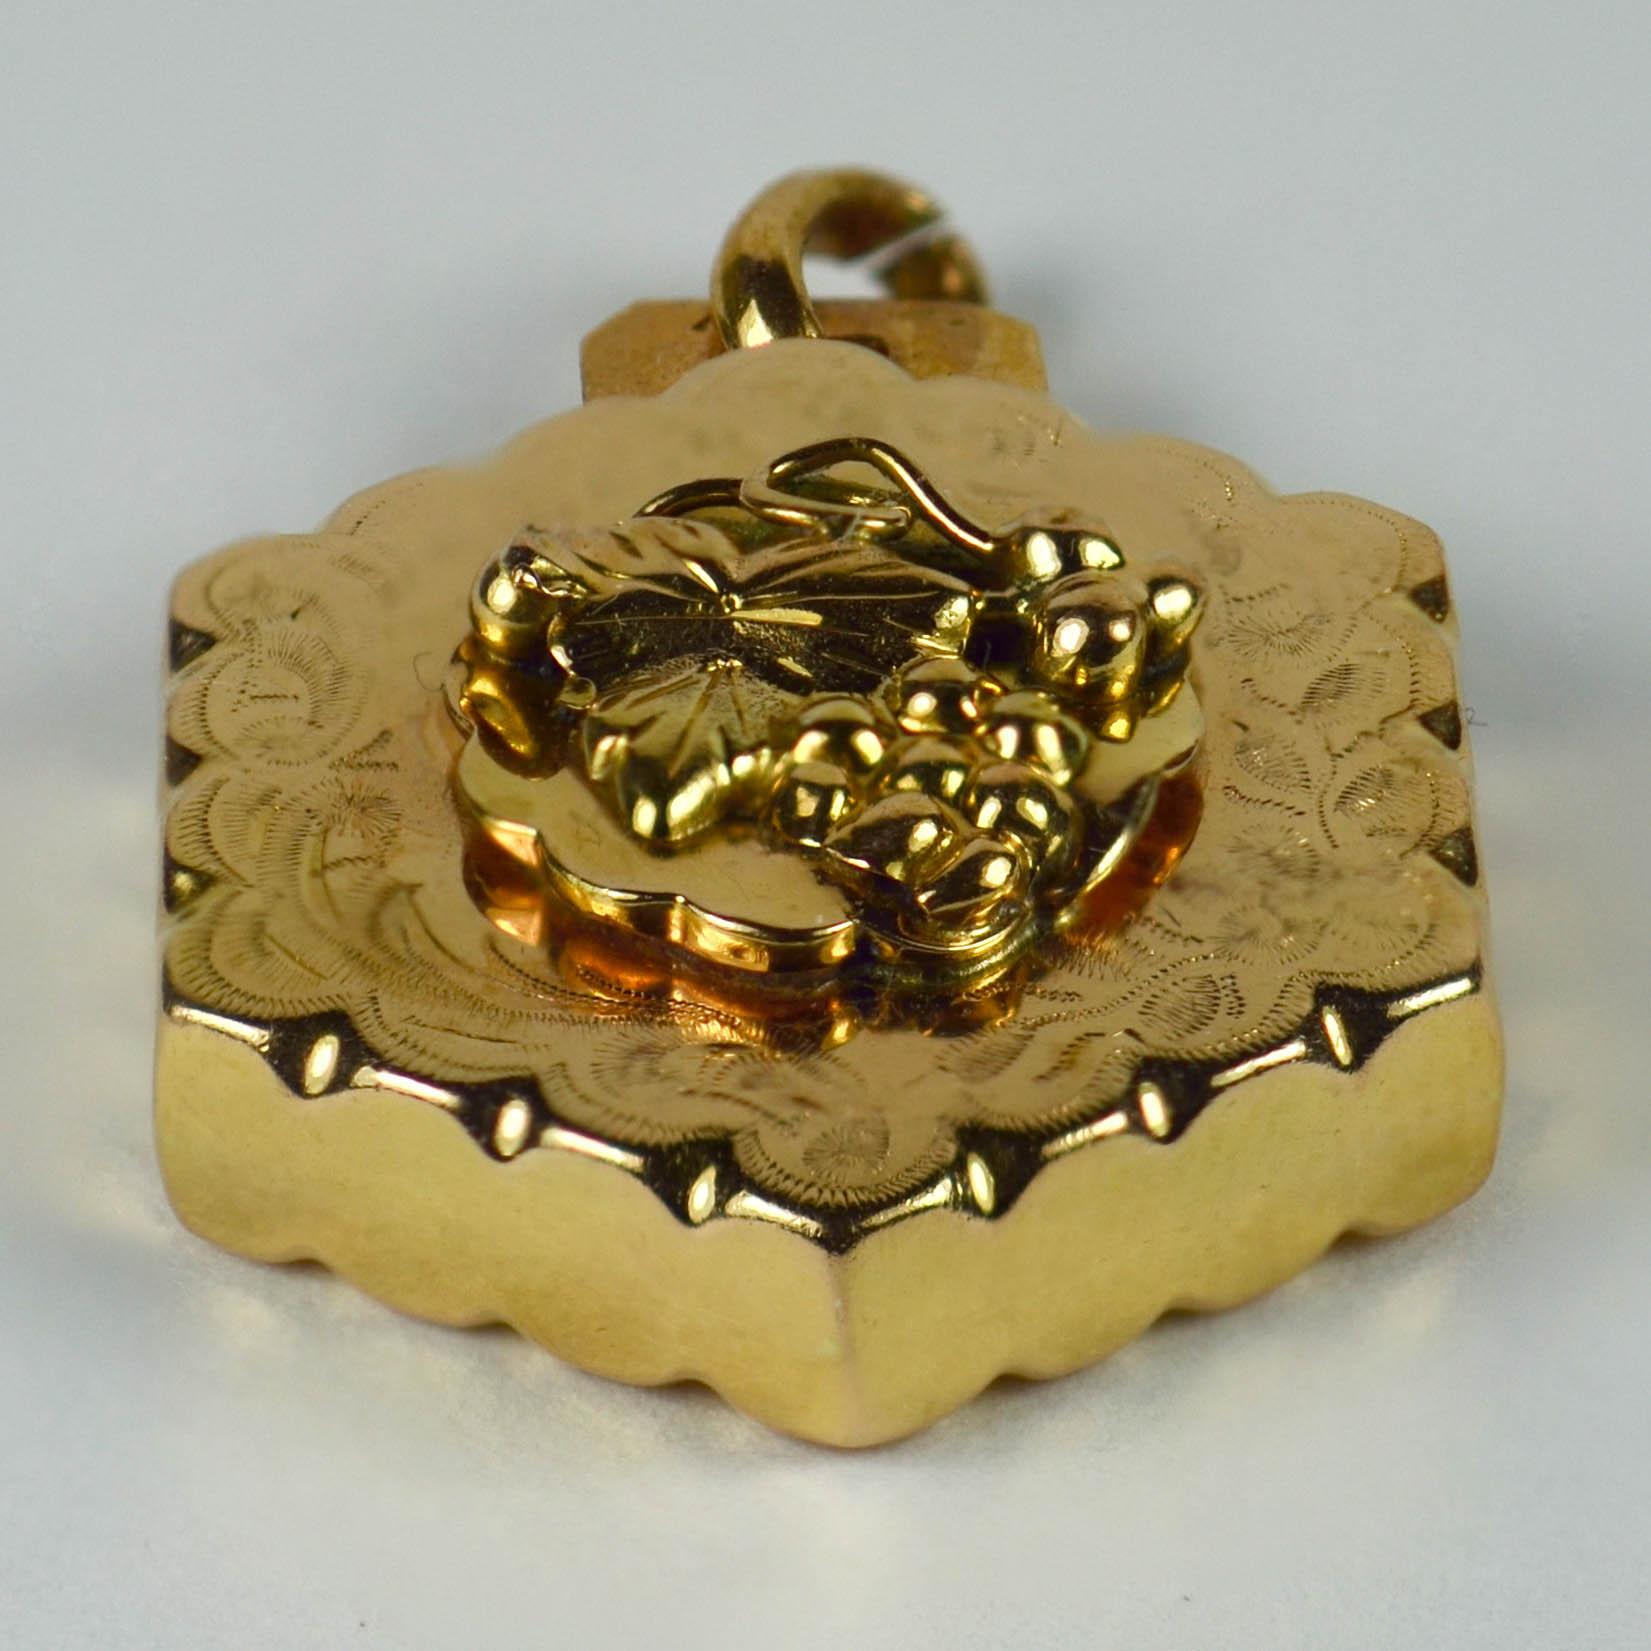 A French 18 karat (18K) yellow gold charm pendant designed as an engraved hexagon with a central rosette featuring a bunch of grapes with vine leaves. Stamped with the eagle's head for 18 karat gold and French manufacture.

Dimensions: 2.8 x 1.8 x